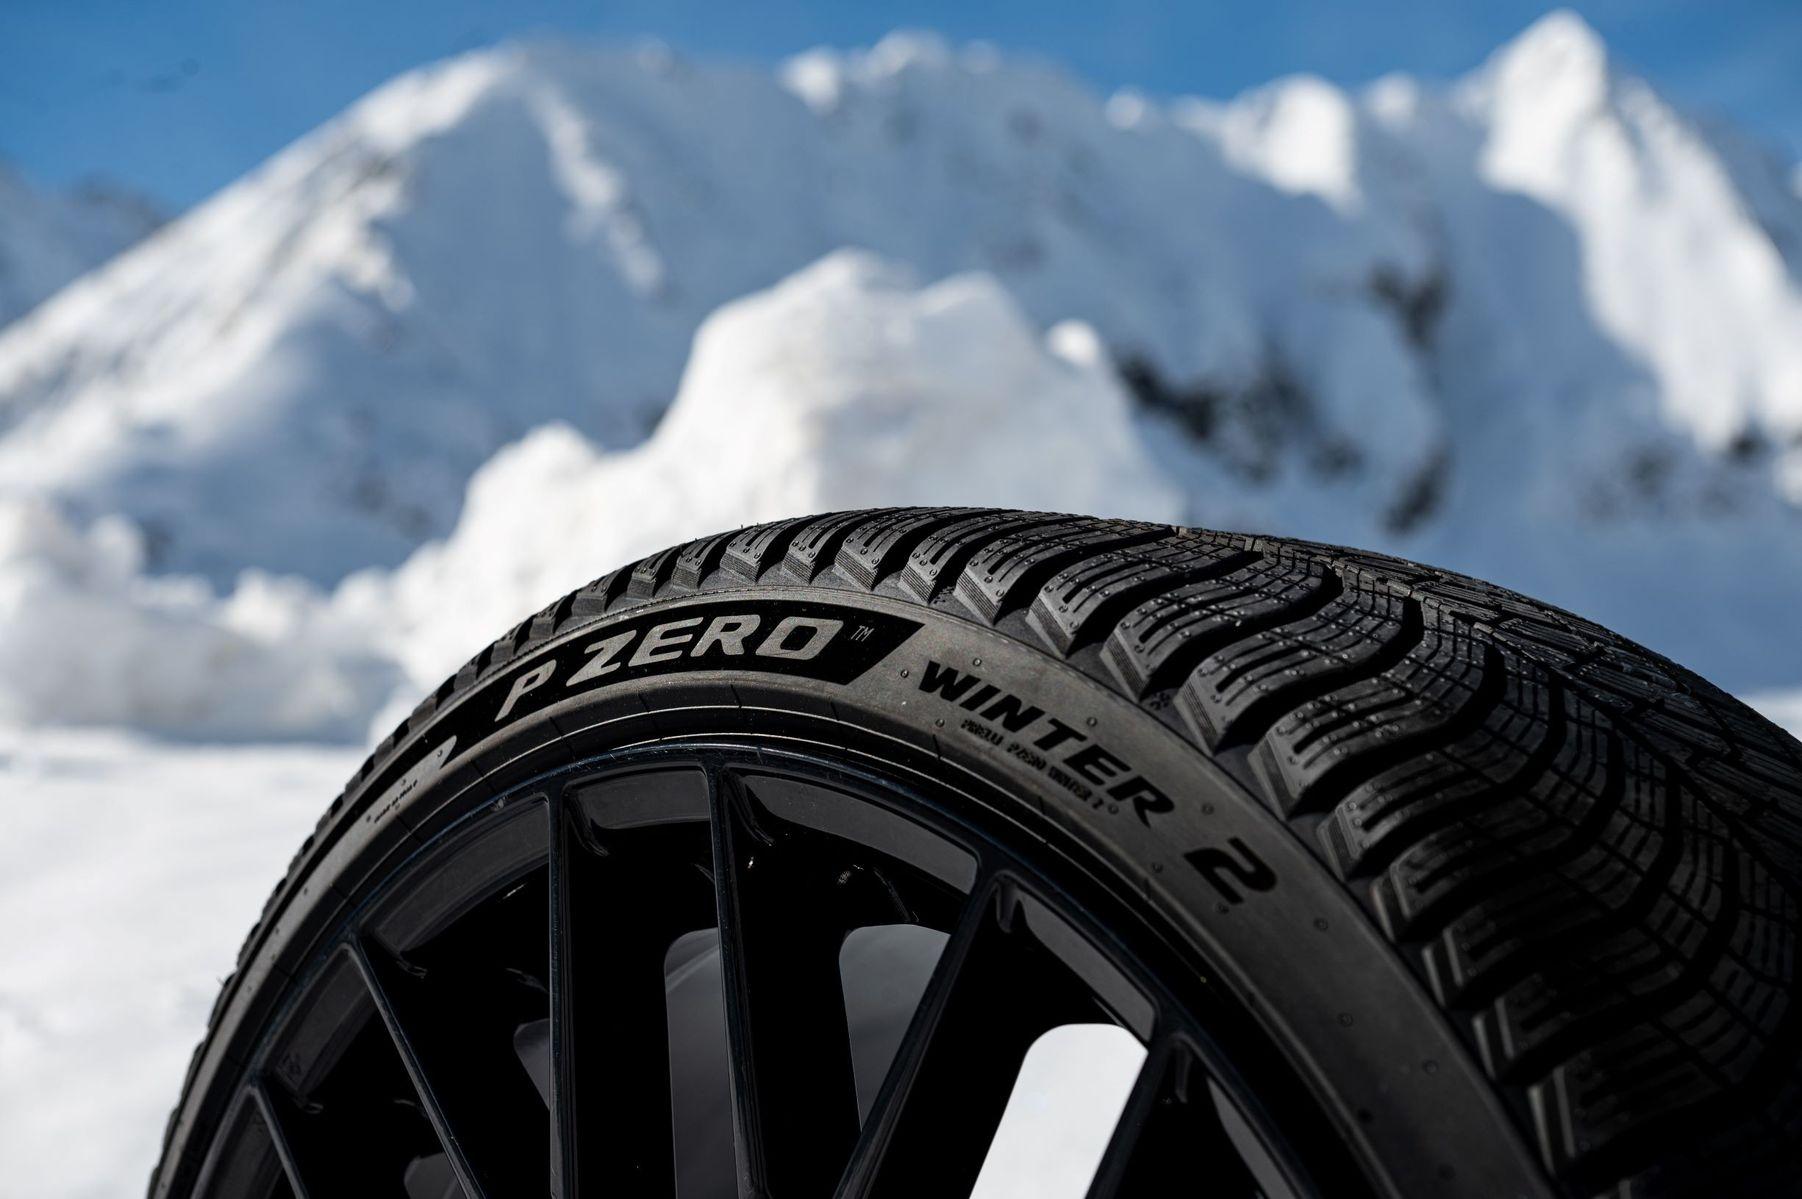 Pirelli and the BMW Group have partnered to launch an innovative version of the new P Zero Winter 2, specifically designed for the BMW 7 Series, offering extended range as well as superior performance and comfort.